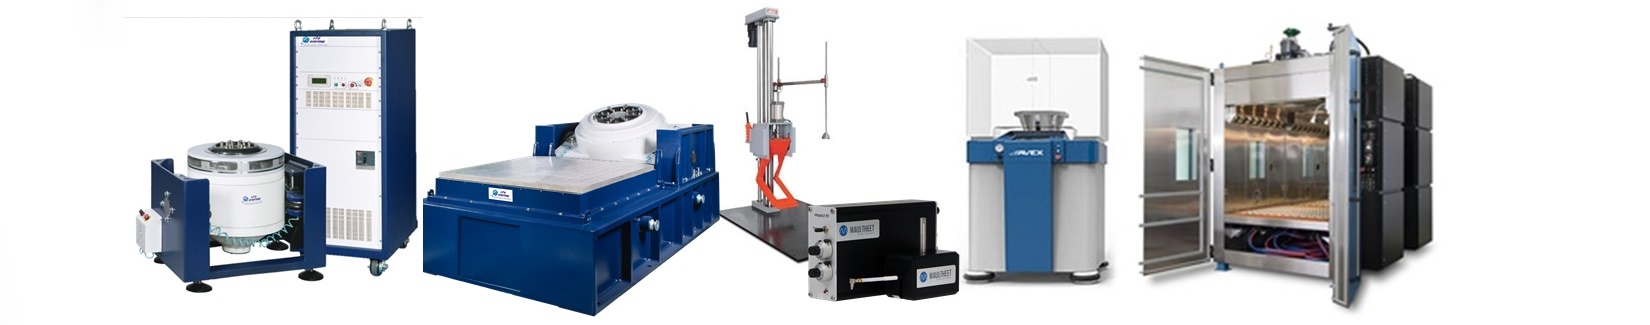 Vibration test - product integrity test systems